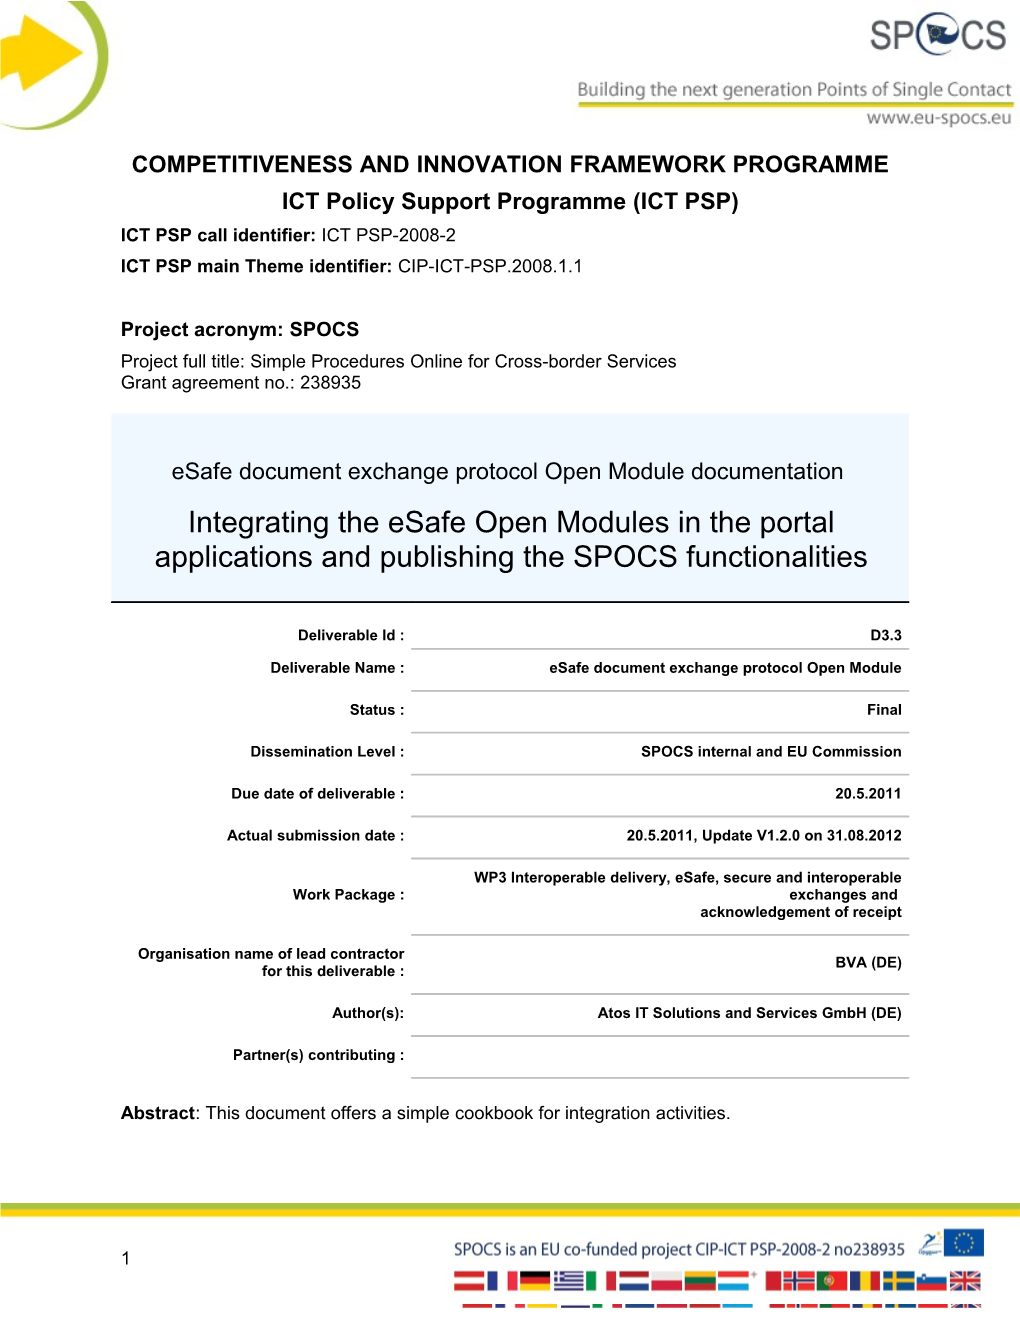 Competitiveness and Innovation Framework Programme s1